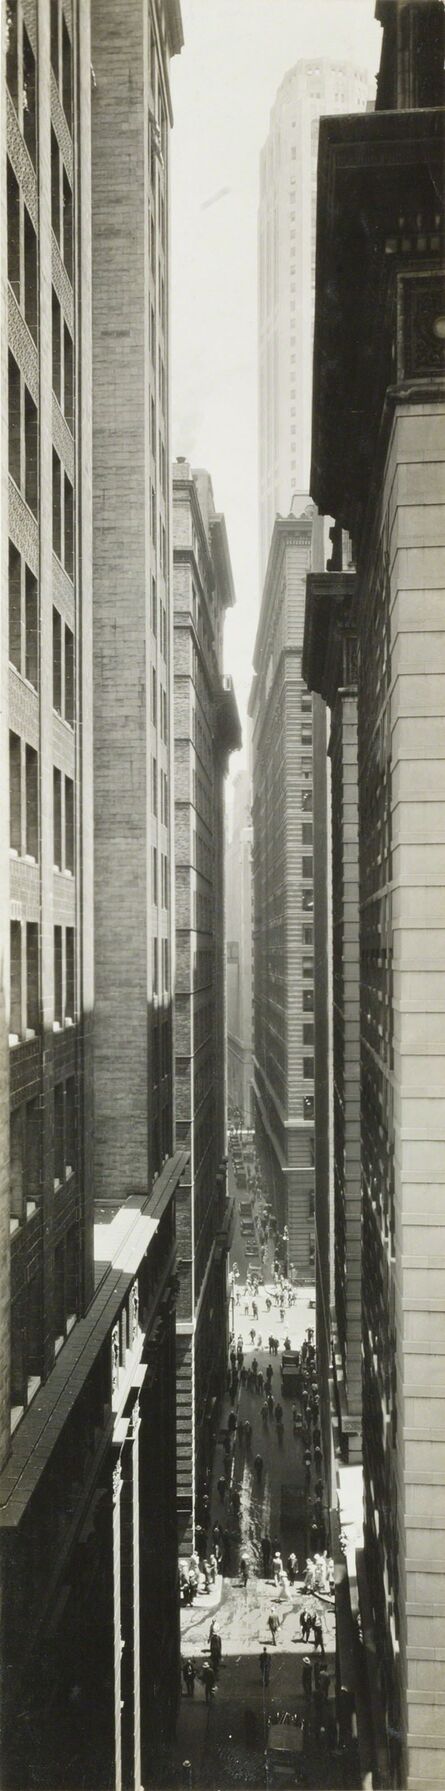 Berenice Abbott, ‘View of Exchange Place from Broadway, New York’, 1934